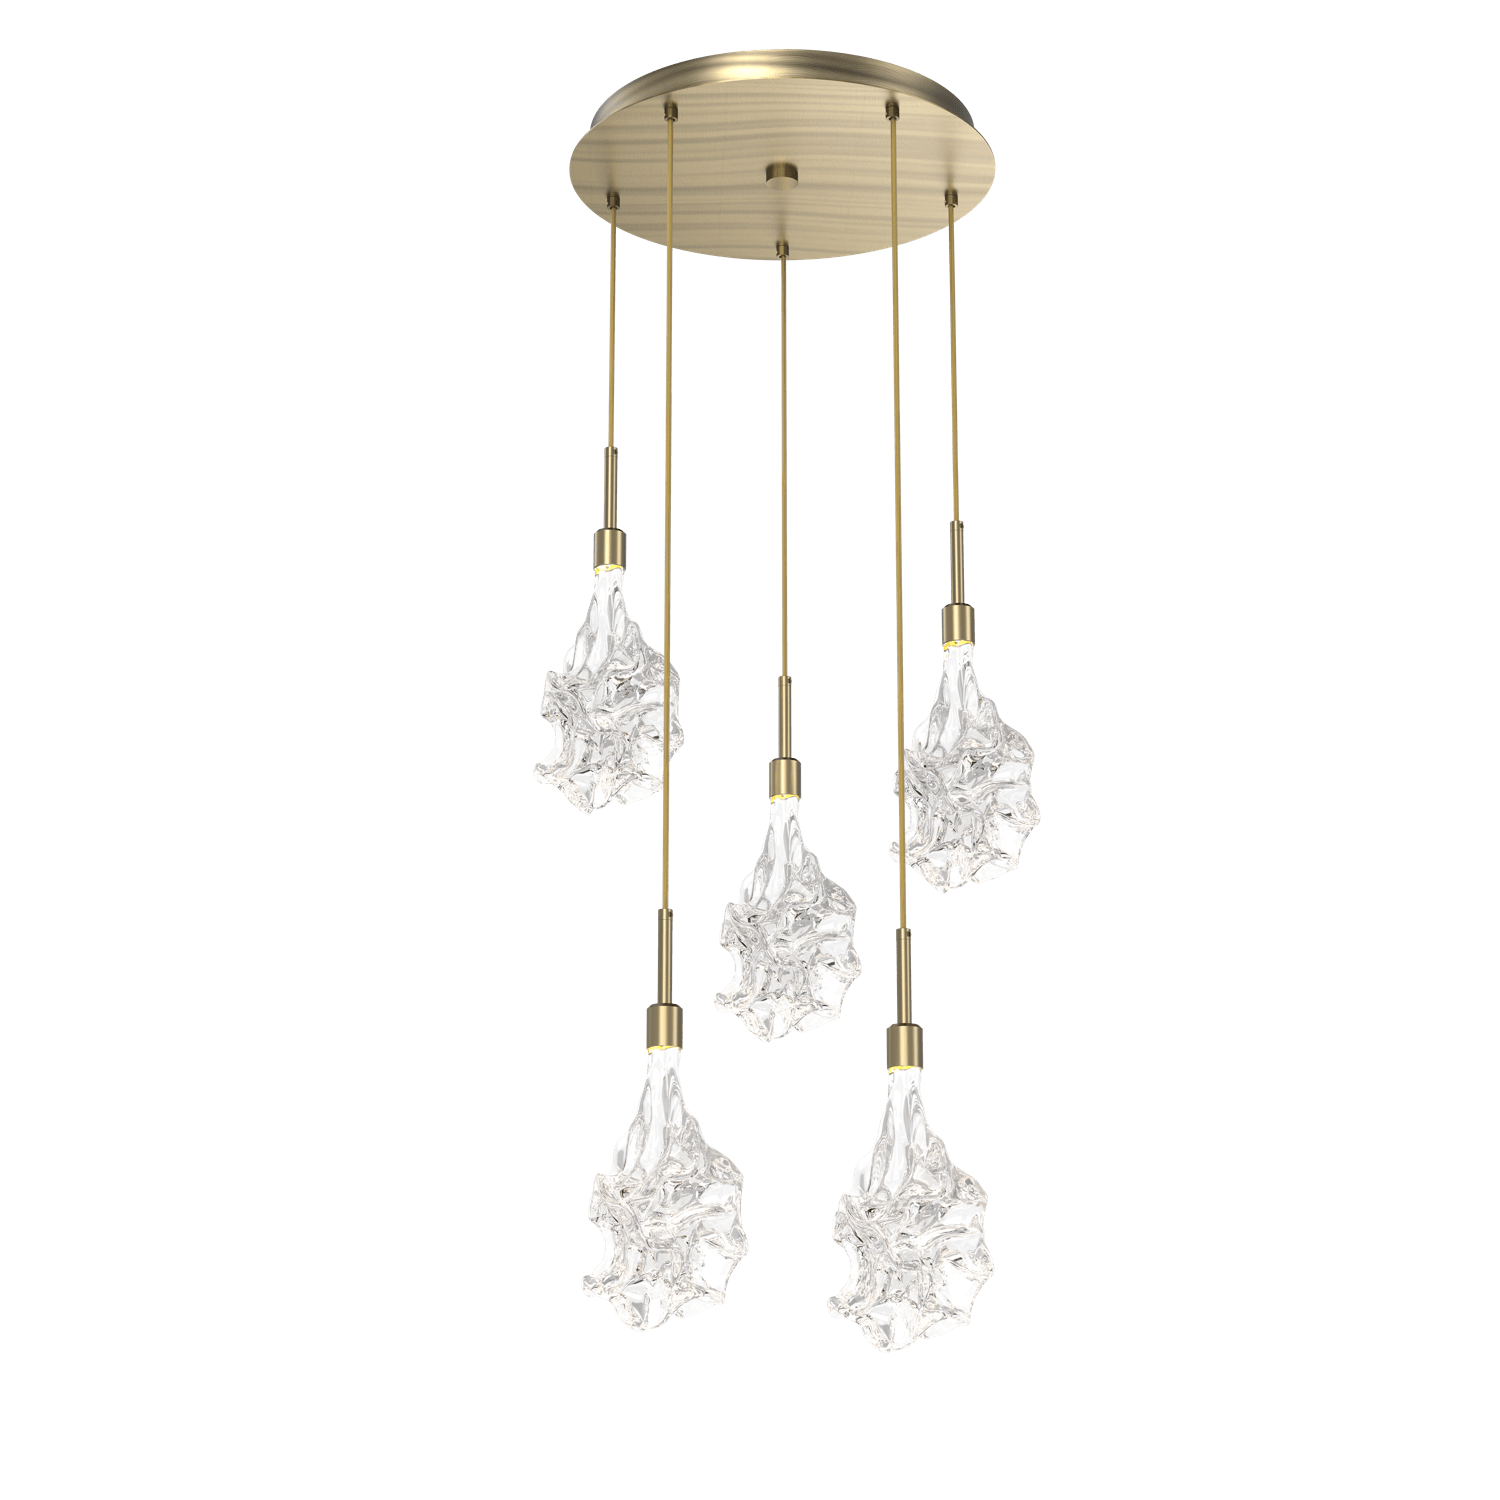 CHB0059-05-HB-Hammerton-Studio-Blossom-5-light-round-pendant-chandelier-with-heritage-brass-finish-and-clear-handblown-crystal-glass-shades-and-LED-lamping